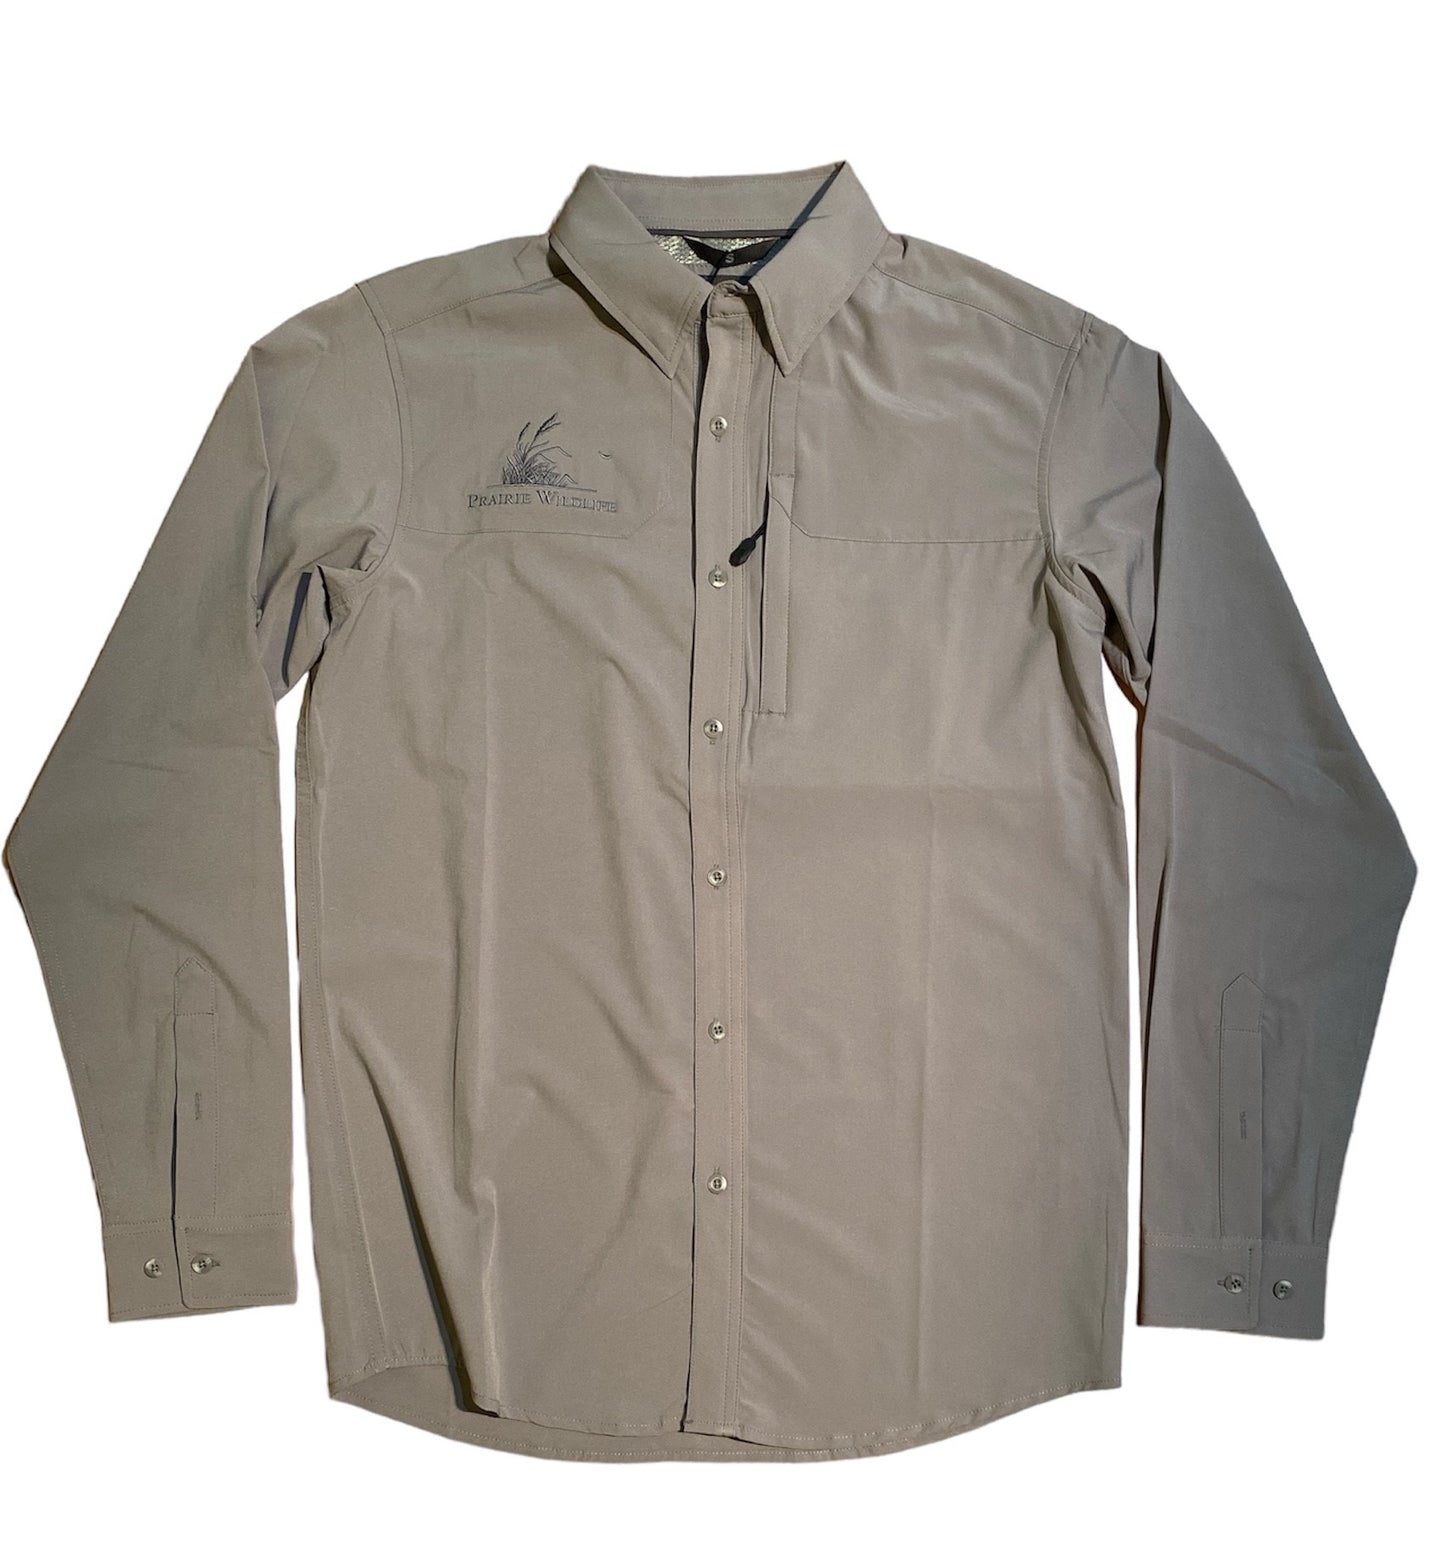 Private Label Lightweight Long-Sleeve Shooting Shirt